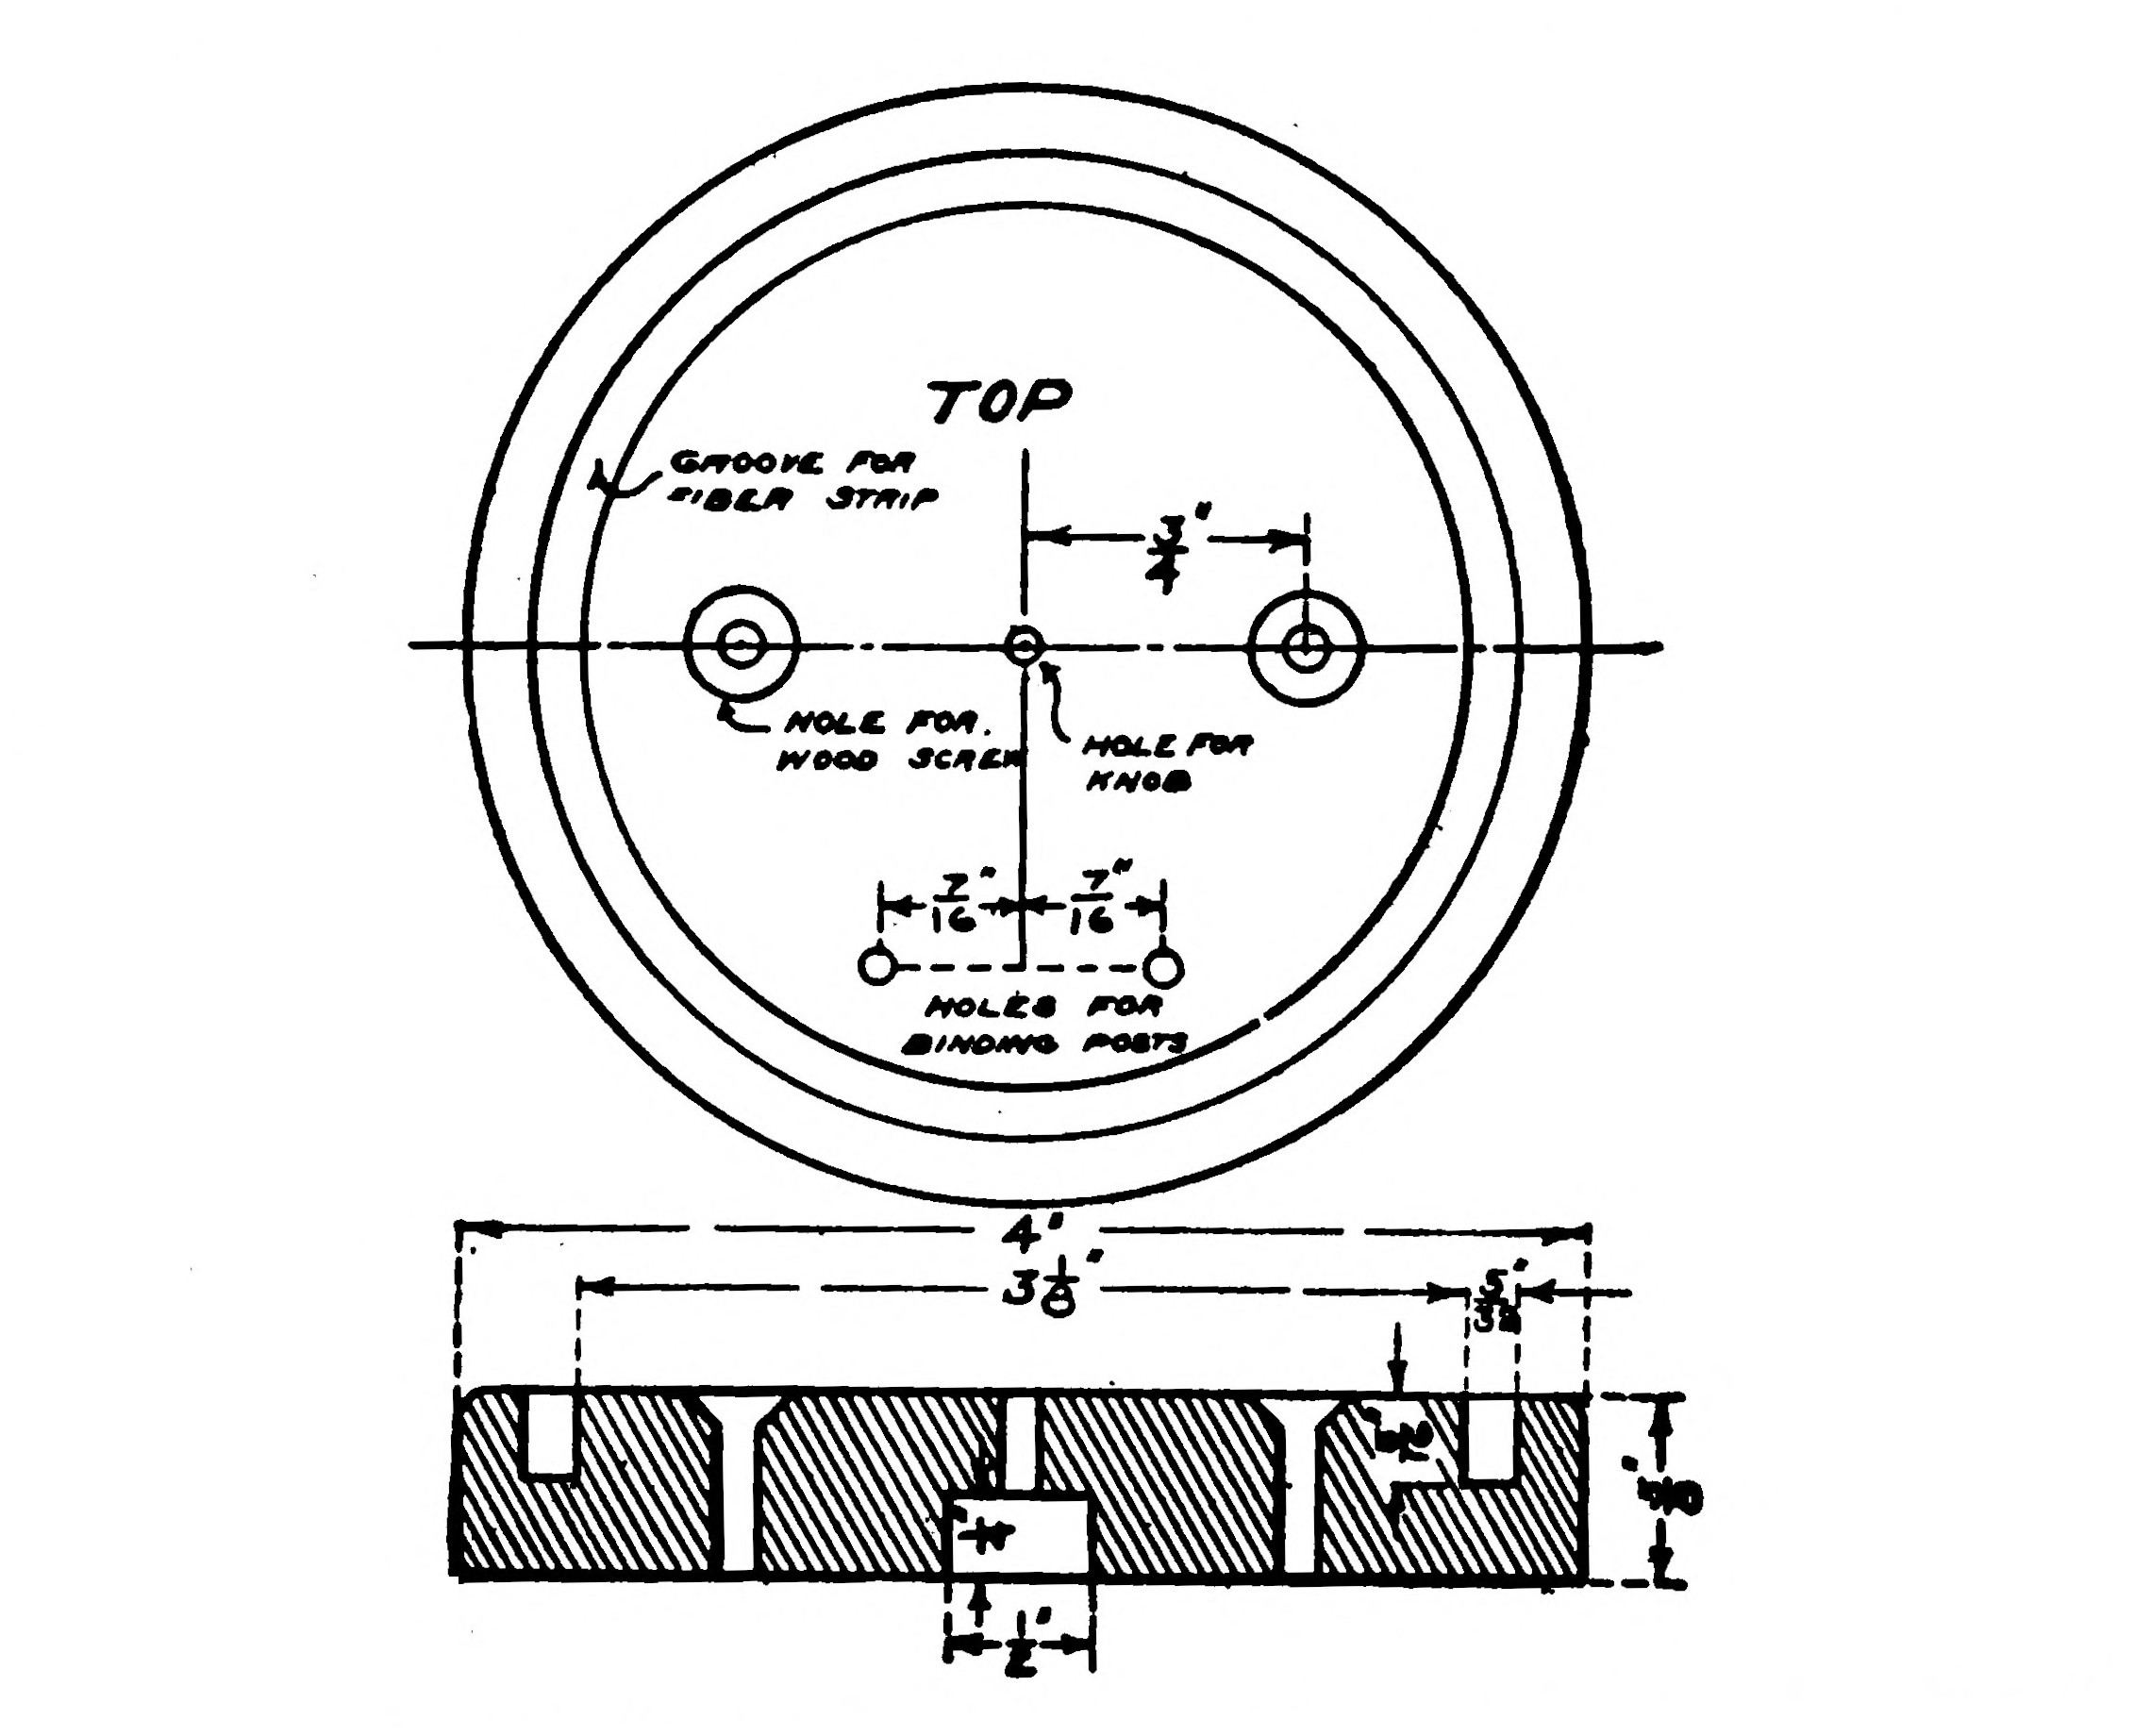 FIG. 78.—Details of the Rheostat Base. The lower part of the illustration is a cross section.